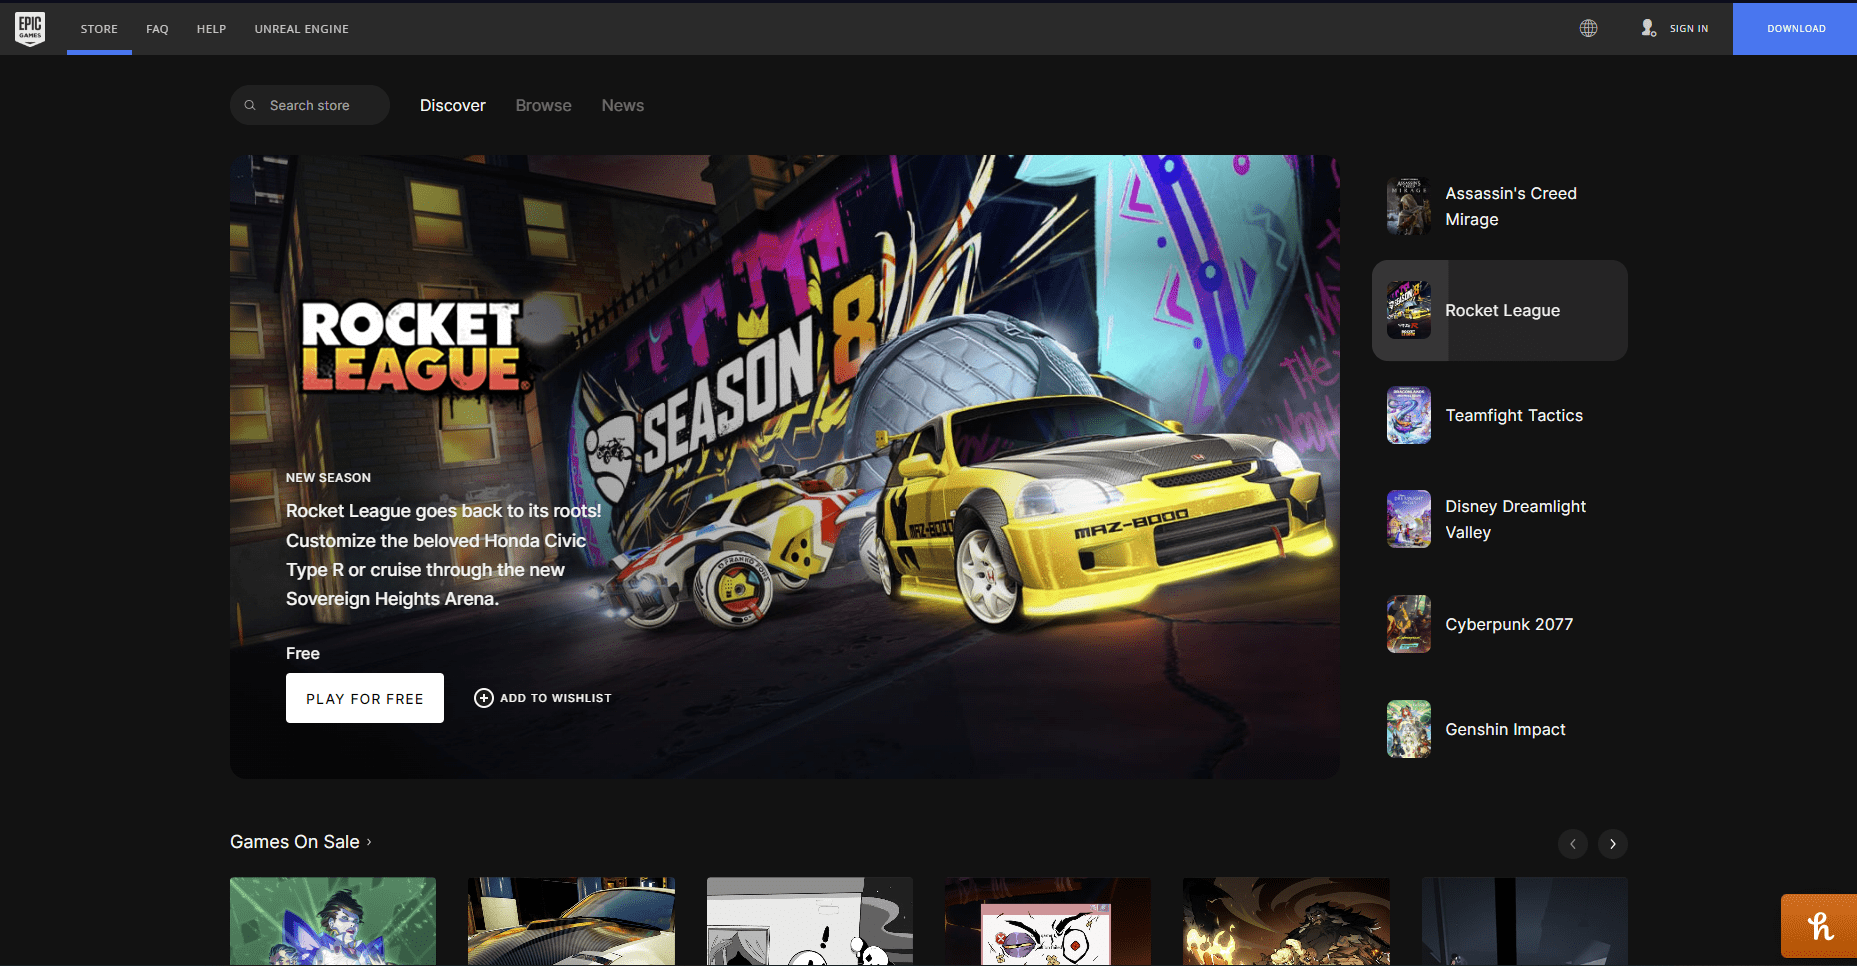 Epic games store website.